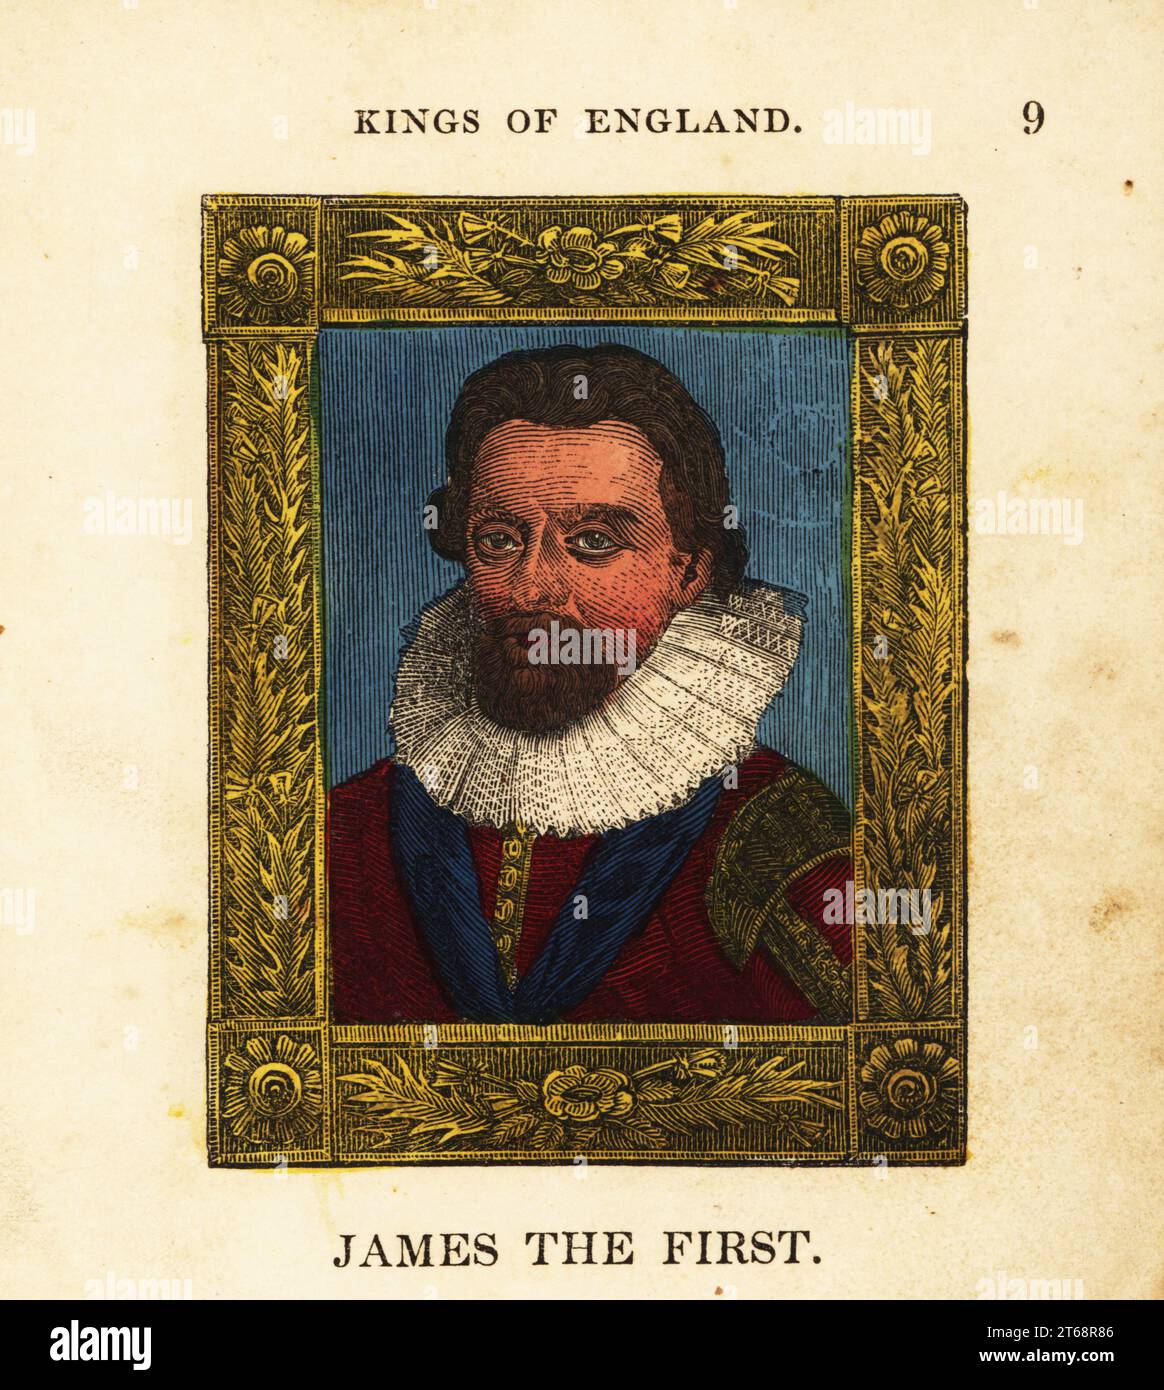 Portrait of King James the First, King James I of England, born 1566, began reign 1603 and died 1625. In lace ruff collar, doublet, within ornate frame. Handcolored engraving by Cosmo Armstrong from Portraits and Characters of the Kings of England, from William the Conqueror to George the Third, John Harris, London, 1830. Stock Photo